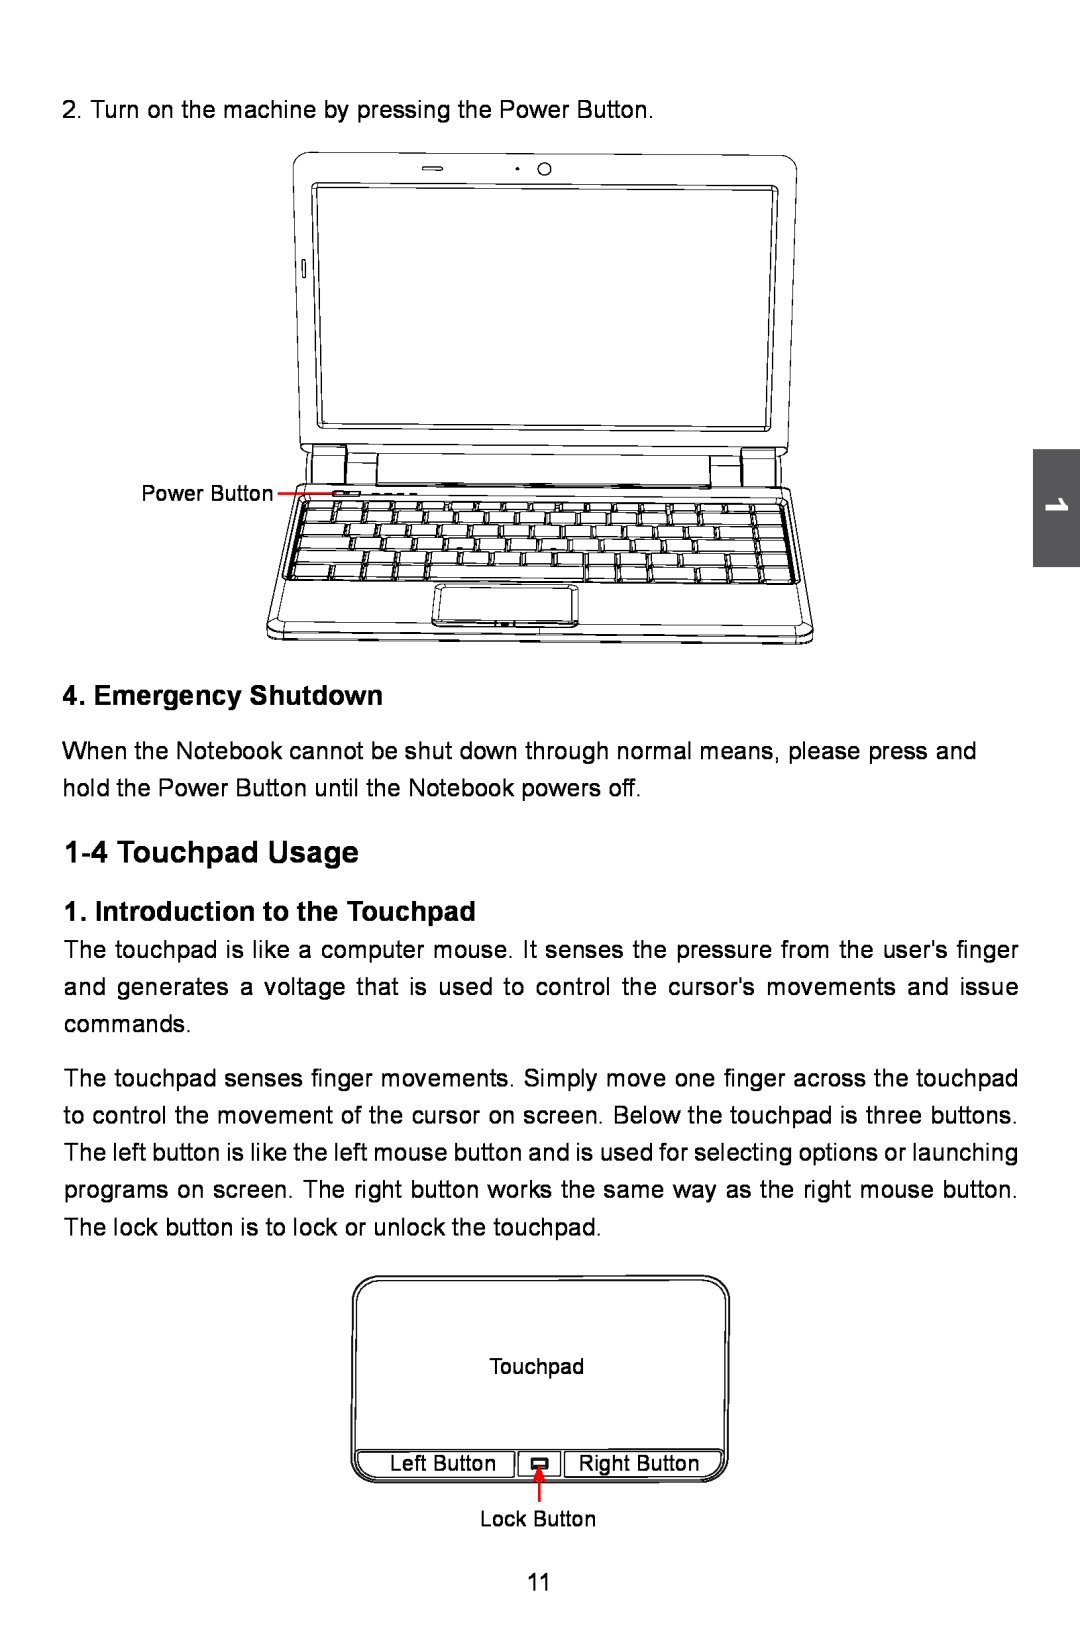 HANNspree SN12E2 manual Touchpad Usage, Emergency Shutdown, Introduction to the Touchpad 